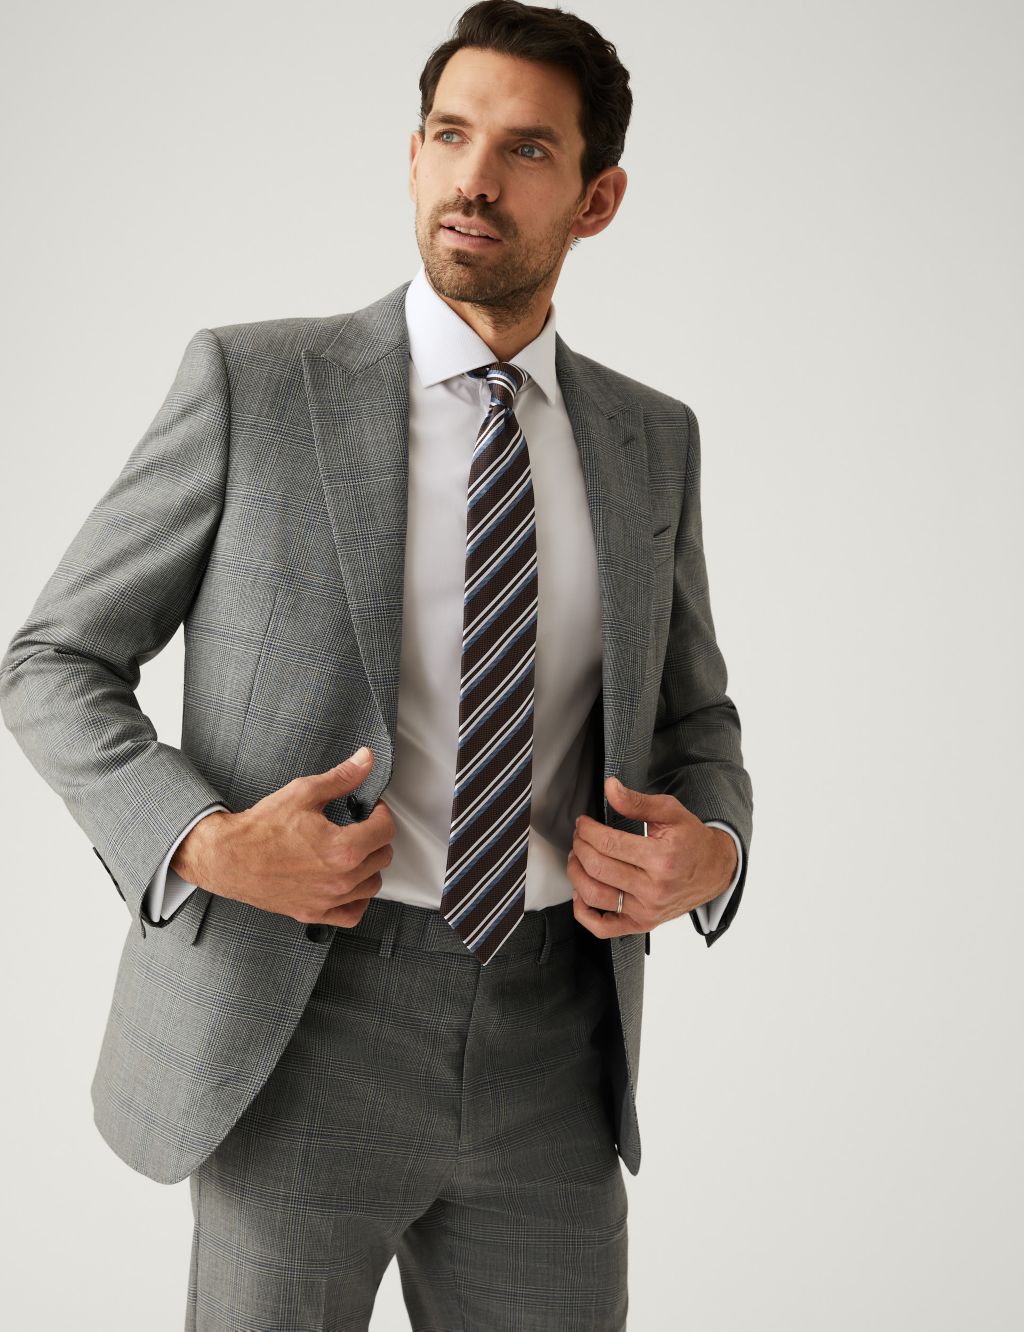 Regular Fit Pure Wool Check Suit Jacket image 1